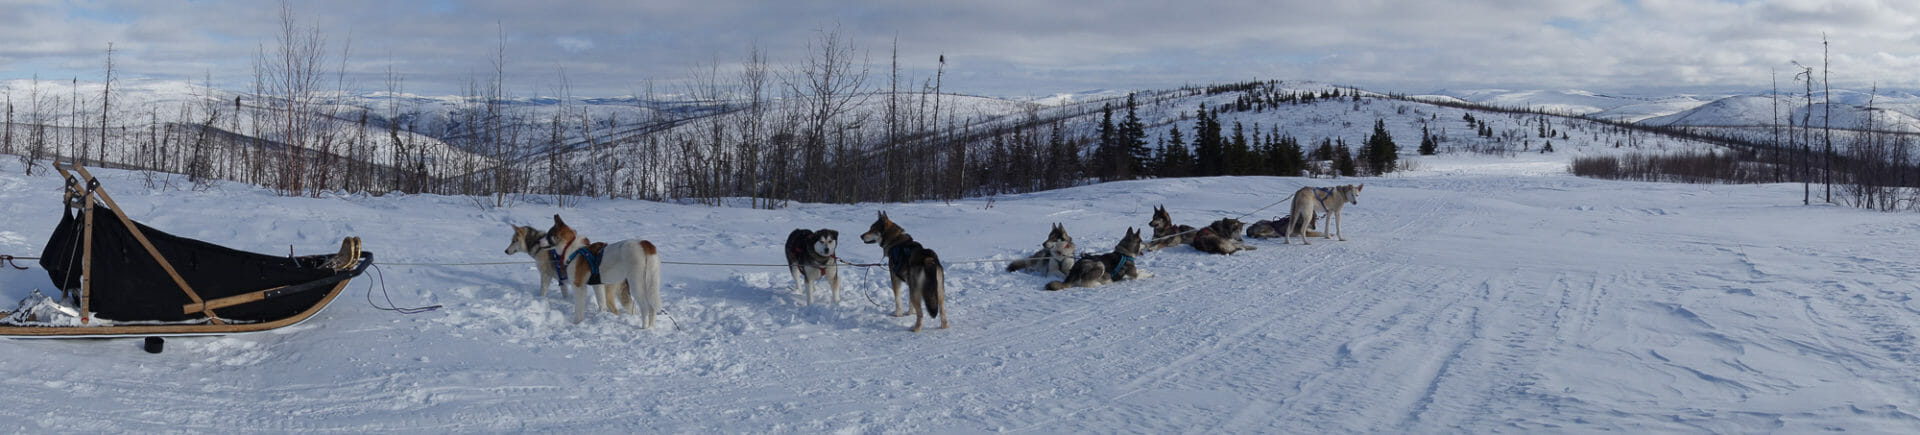 sled and dogs on dog sledding trip in northern Alaska